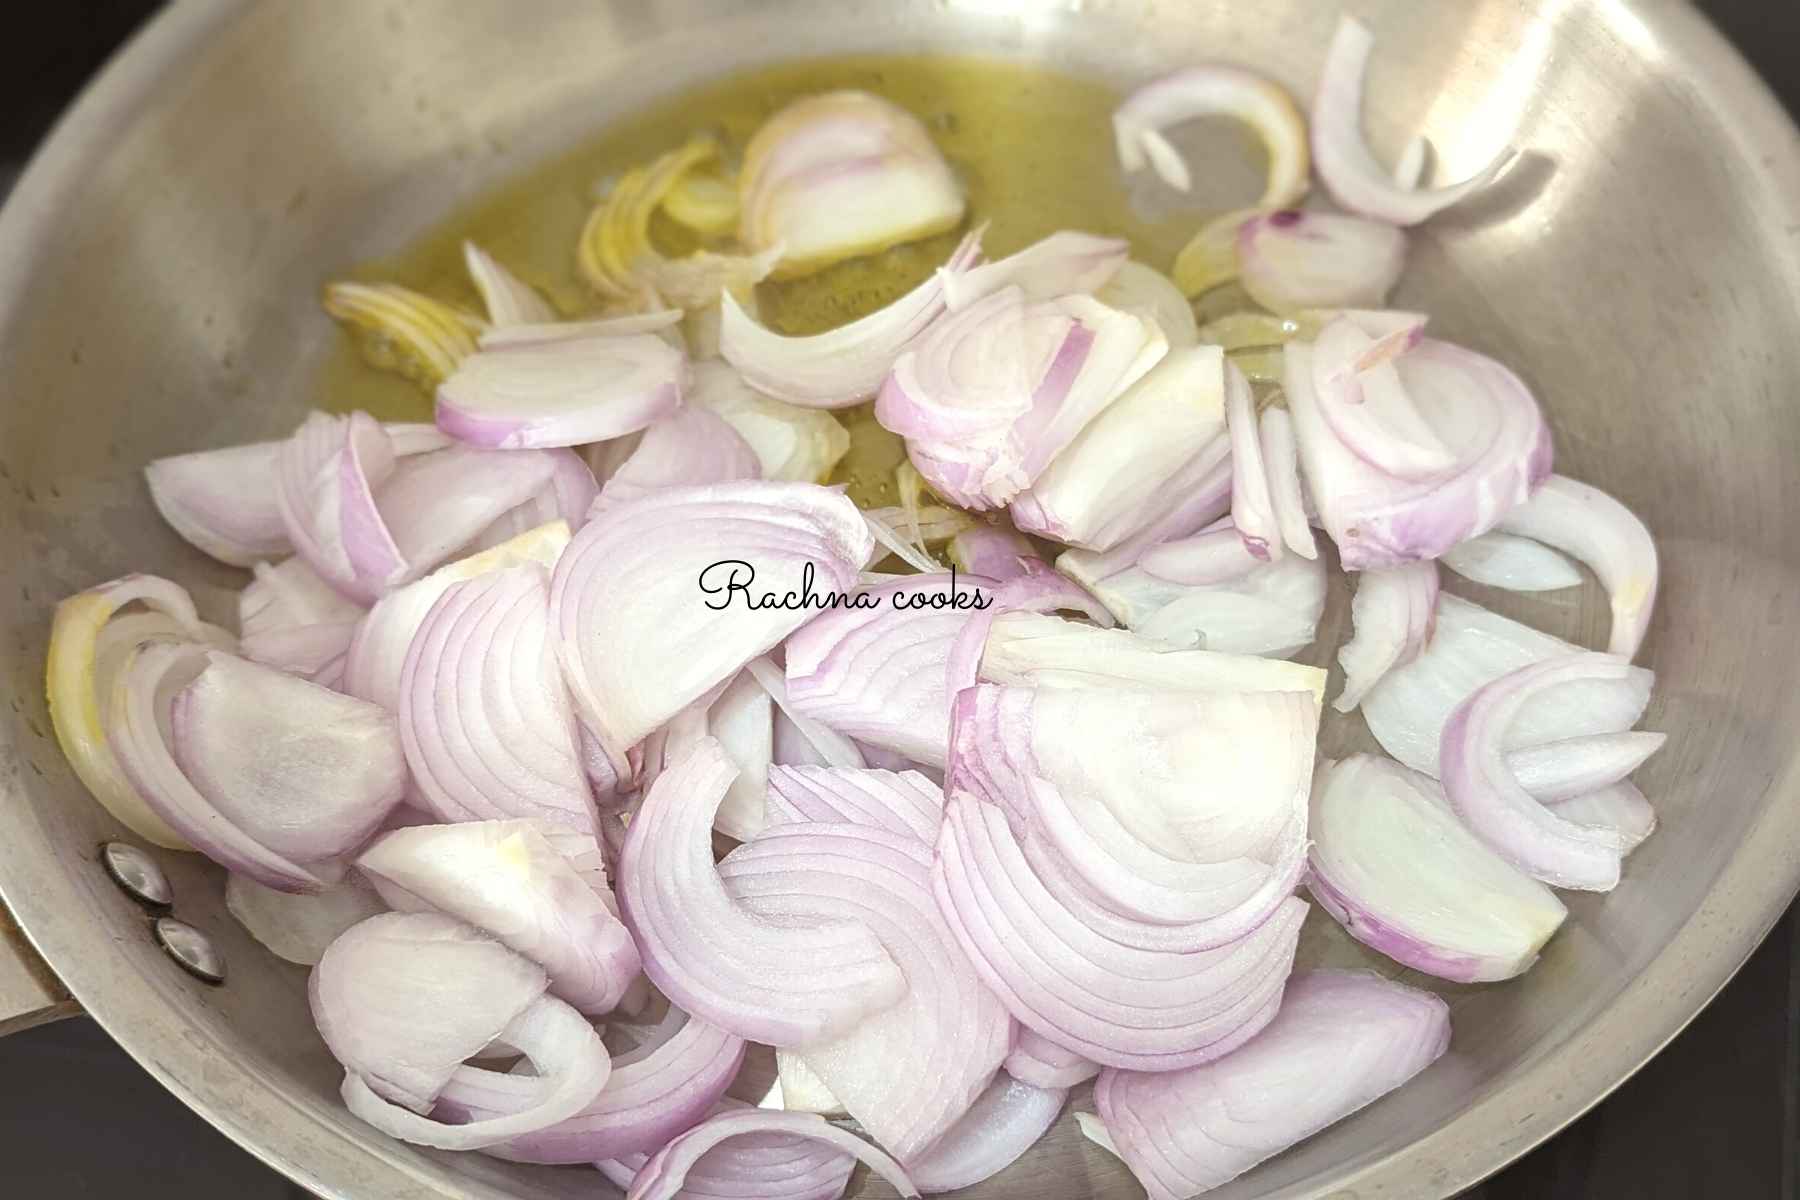 Finely sliced onions added to oil in a pan.